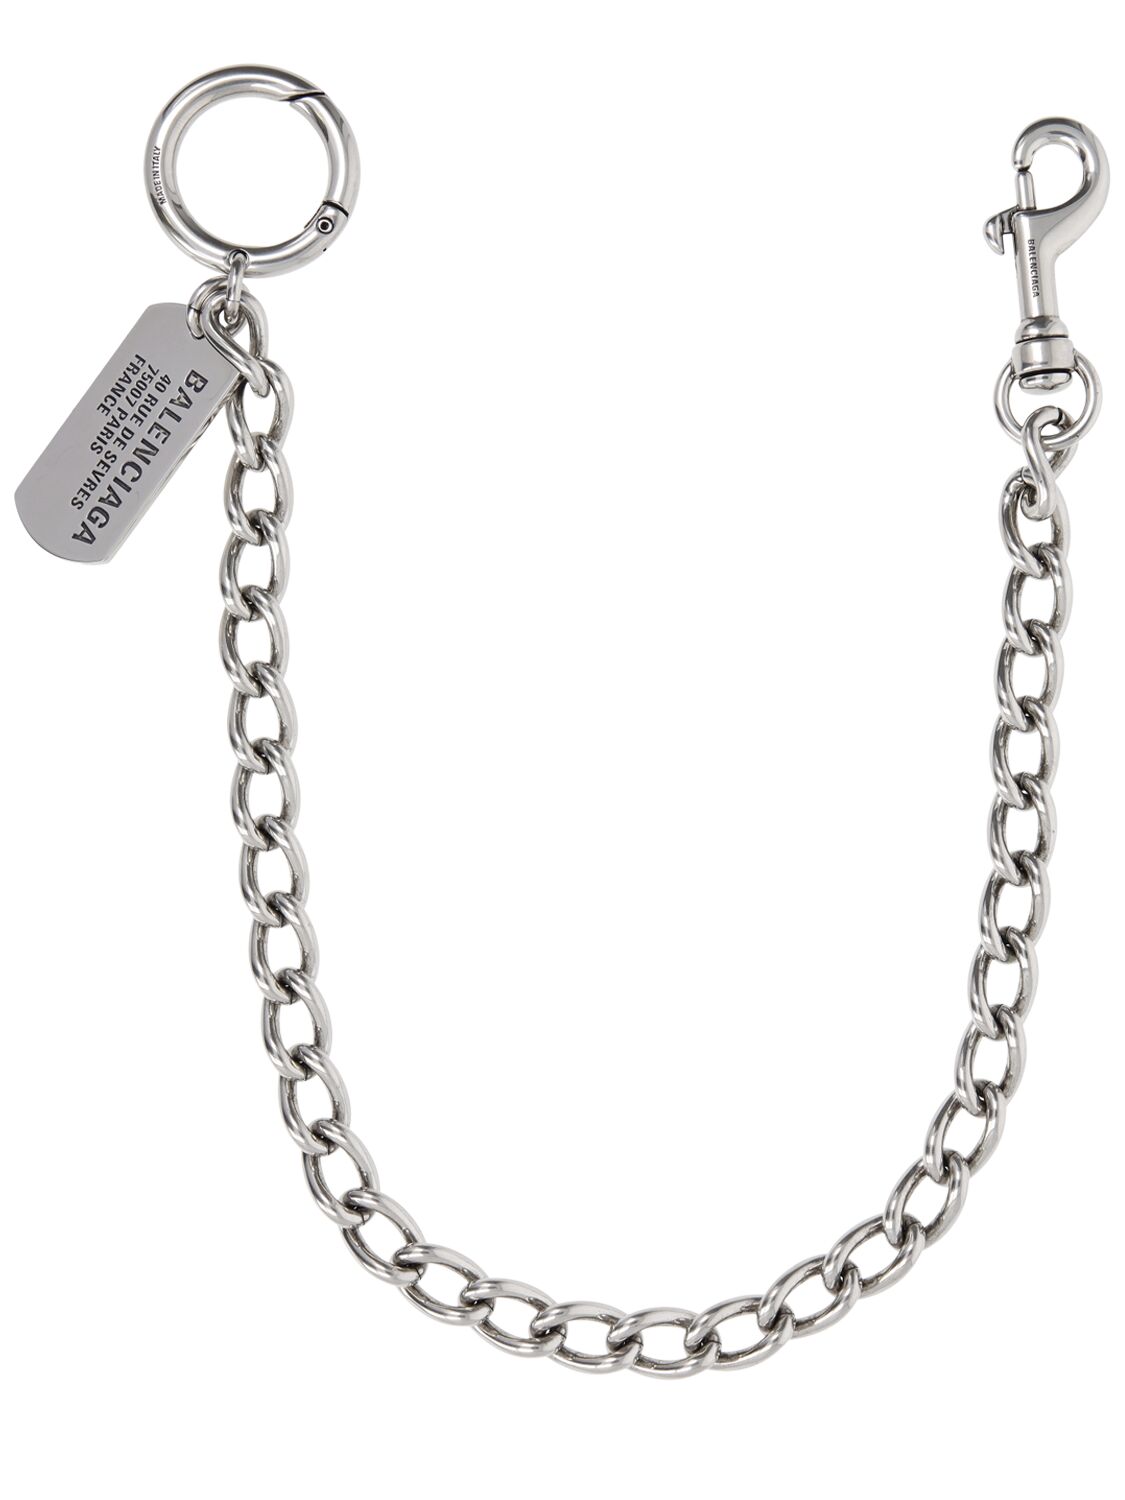 Tags Brass Blend Wallet Chain